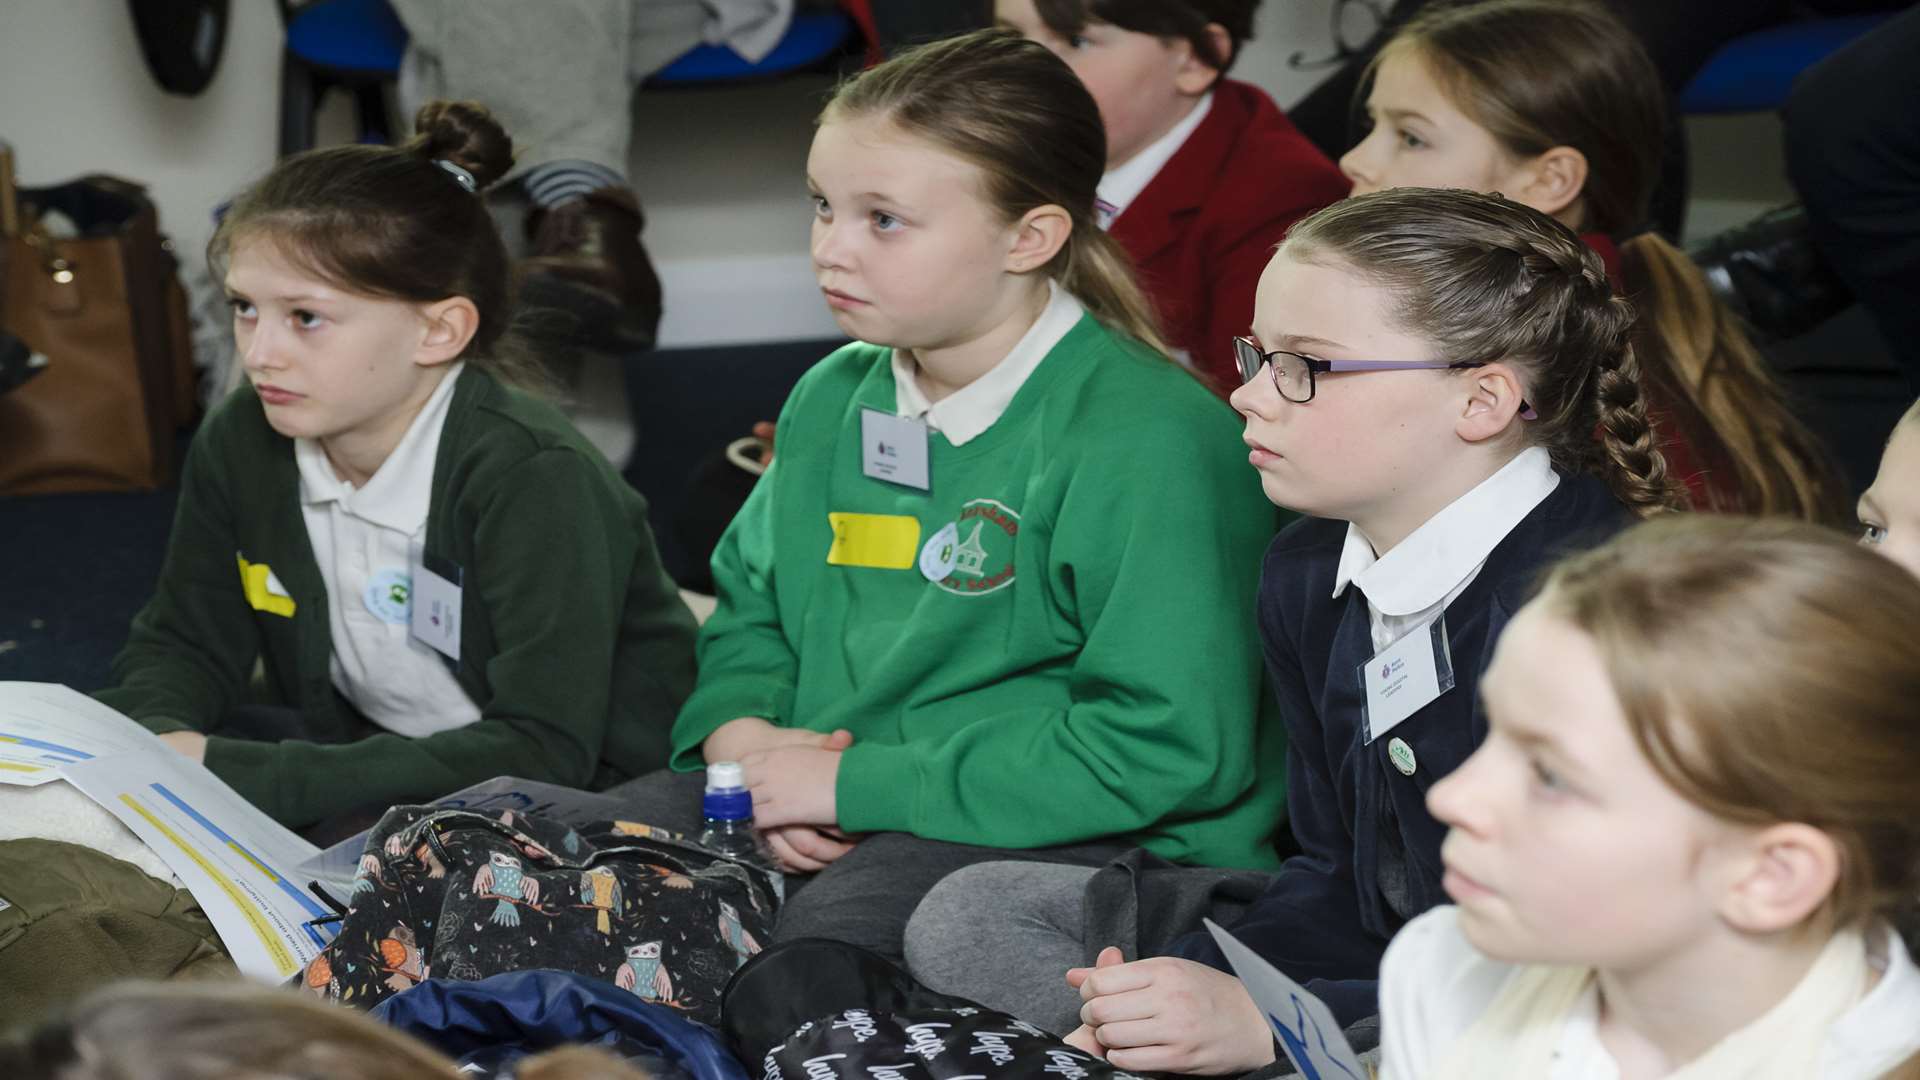 Children from schools across Kent attend an online safety day